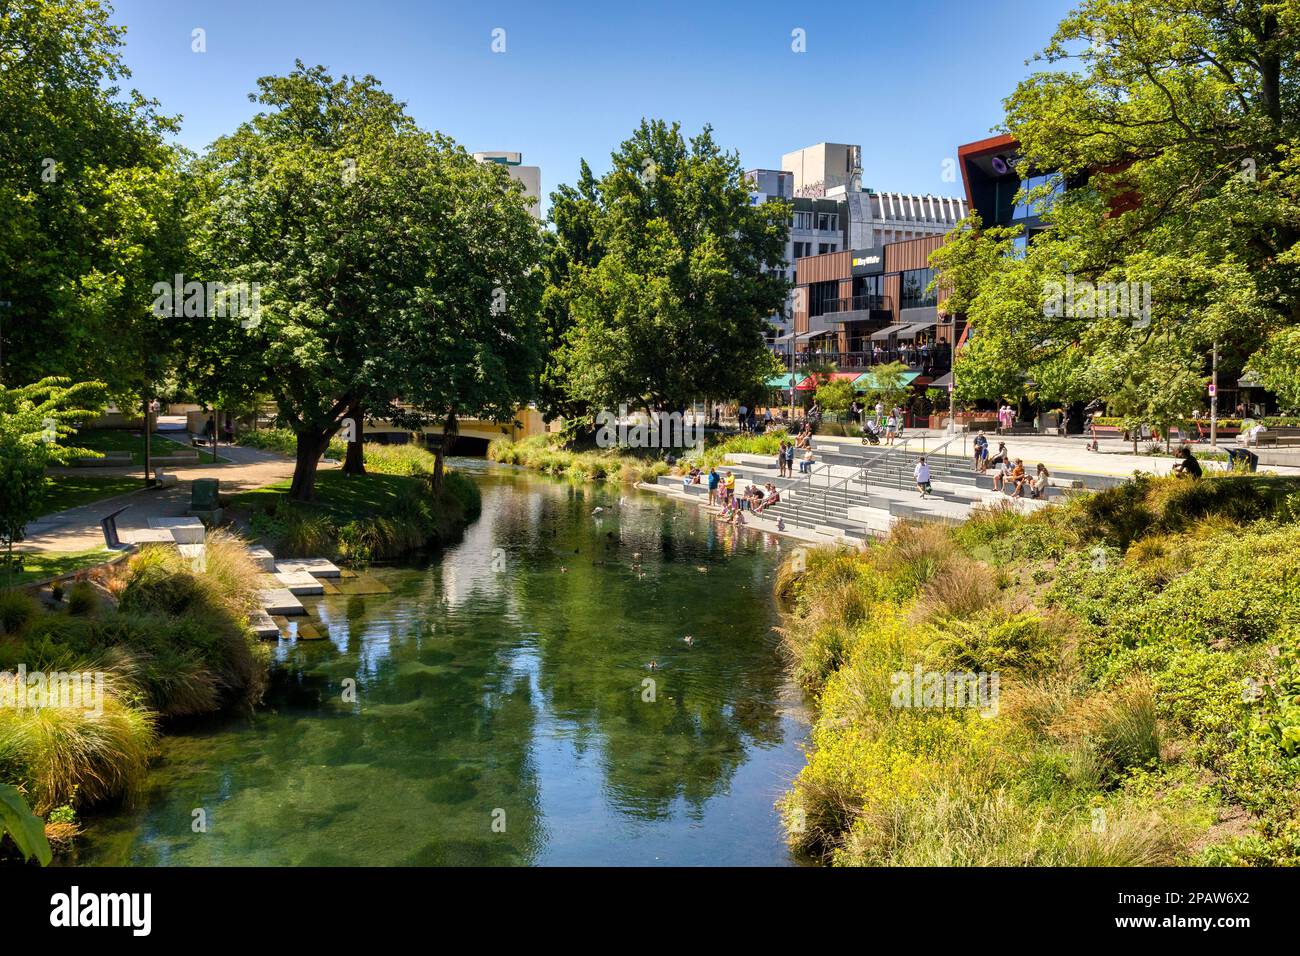 31 December 2022: Christchurch, New Zealand - People enjoying a summer day at The Terrace, a new riverside development, sitting on the steps by the ri Stock Photo